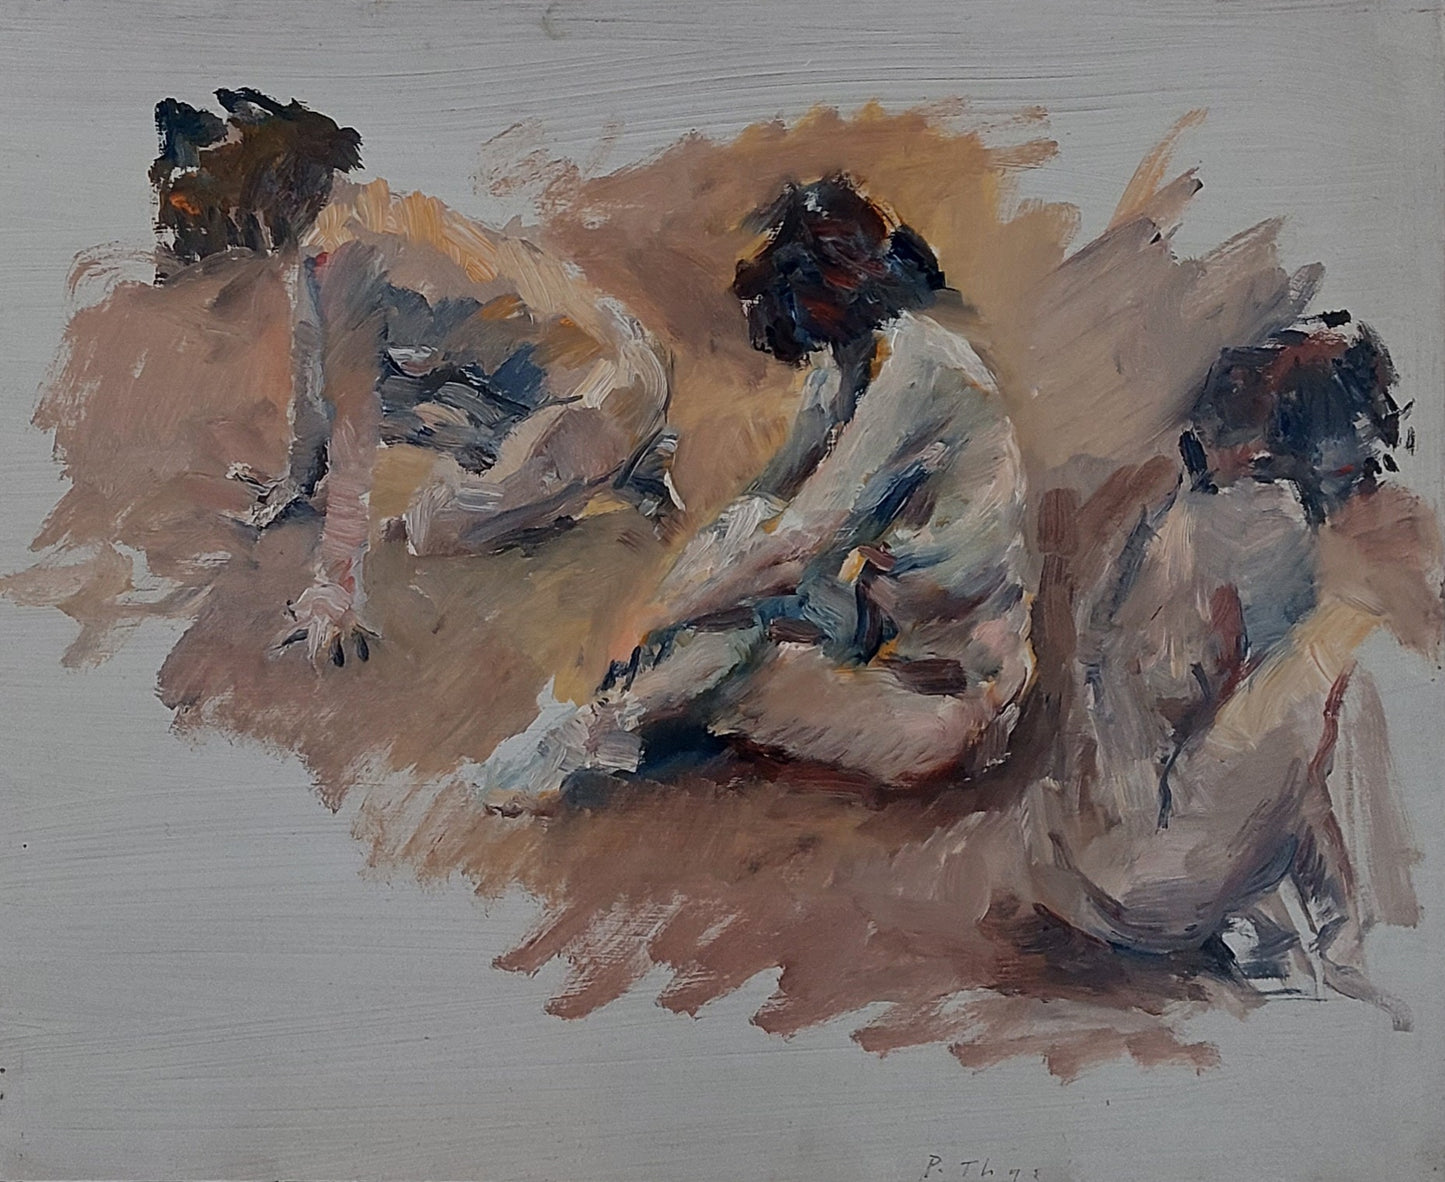 ‘3 Figures study’ 2011 oilpainting on board 50x61cm